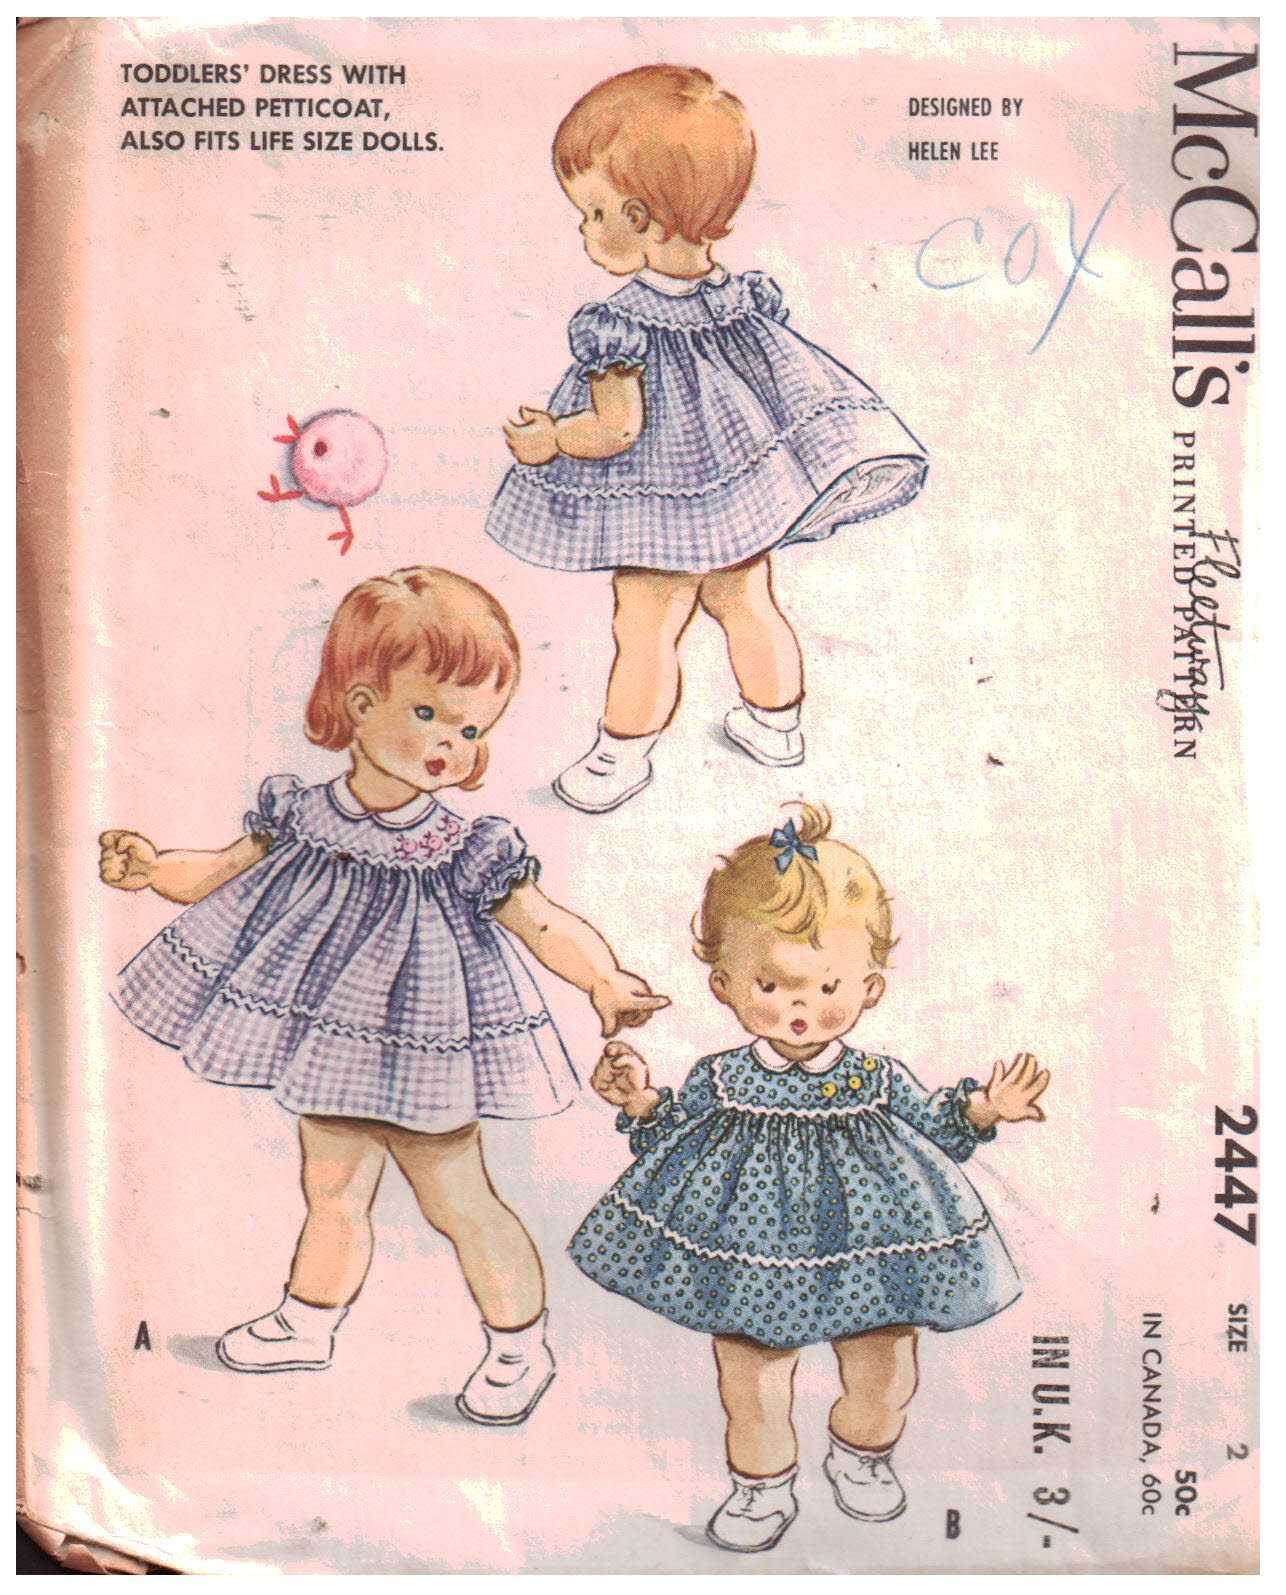 McCall's 2447 Toddlers' Dress, attached Petticoat Size: 2 Used